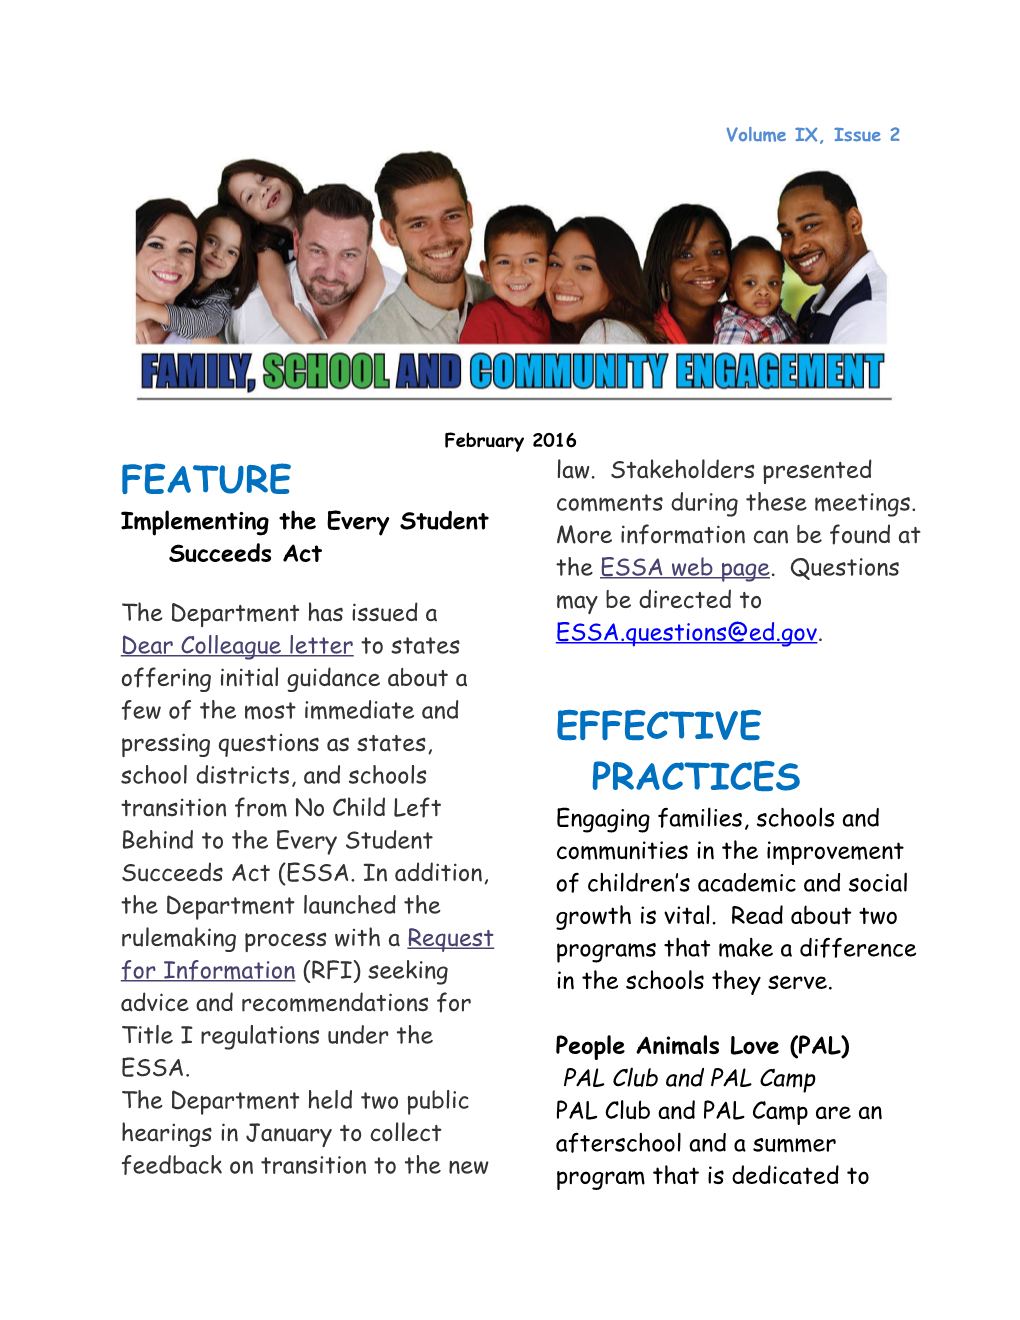 Engaging Families: Volume 9, Issue 2 February 2016 (MS Word)